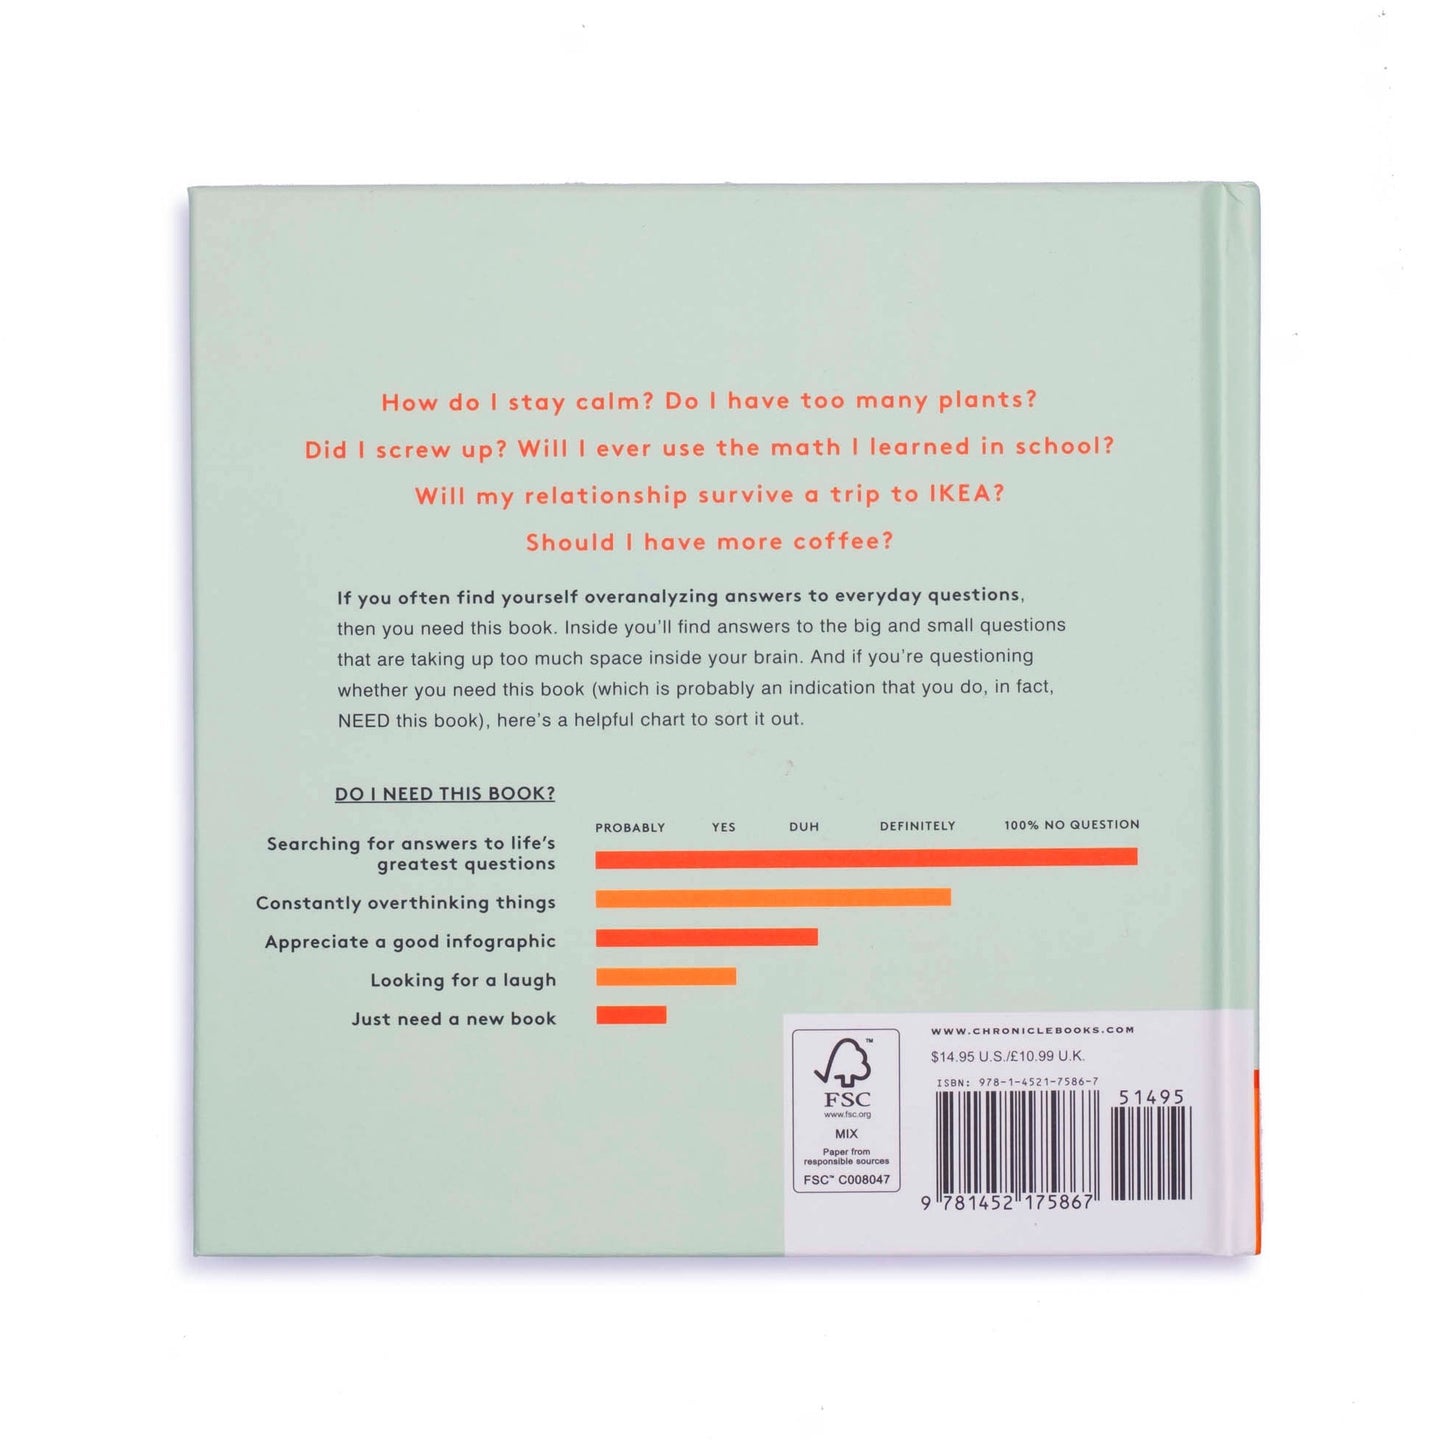 Am I Overthinking This?: Over-answering life's questions in 101 charts - colorfactoryshop